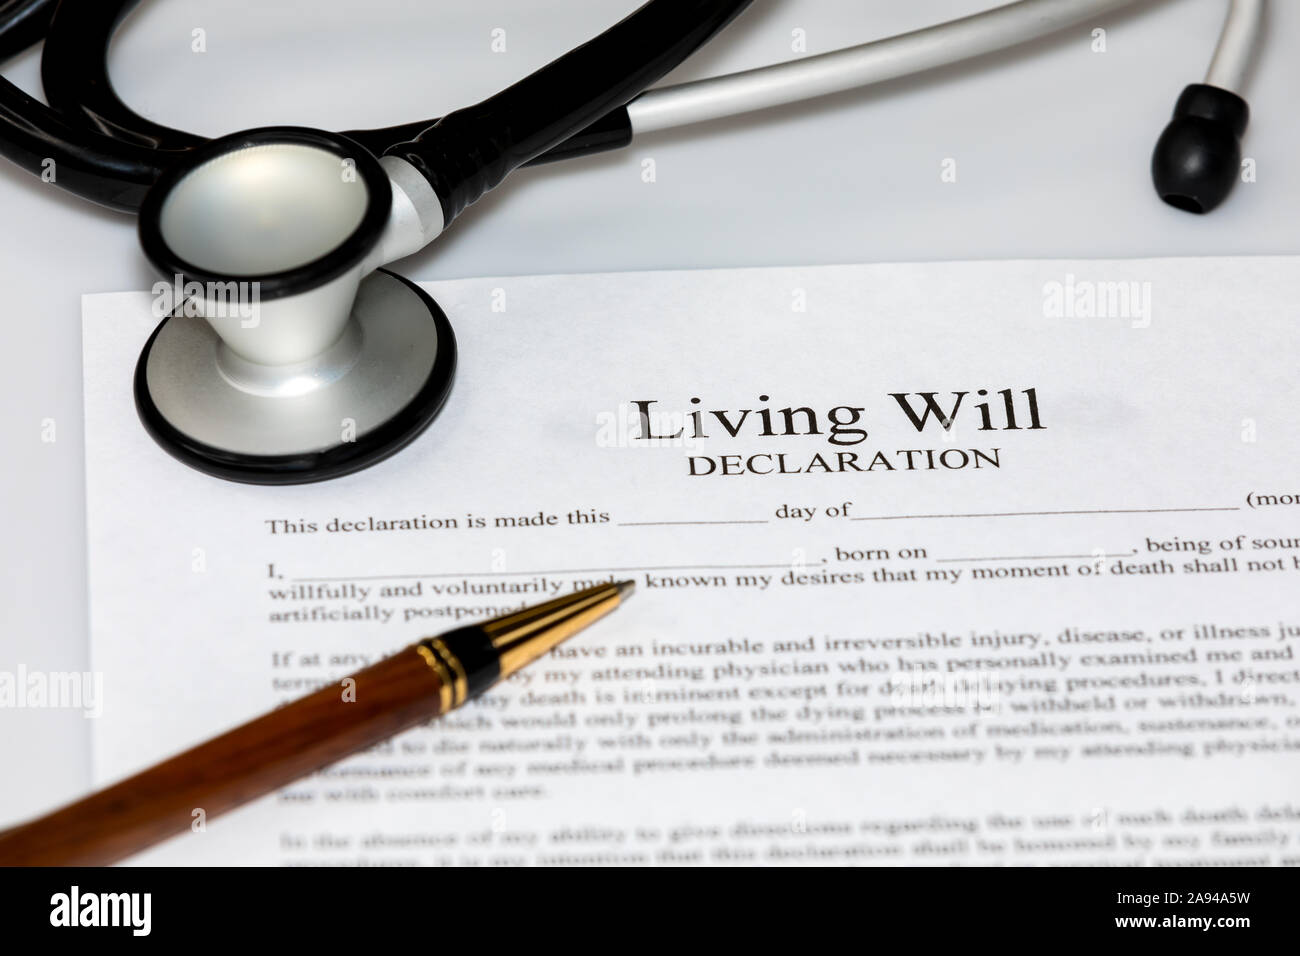 Living will legal document with stethoscope. Healthcare, end of life planning and medical treatment concept Stock Photo